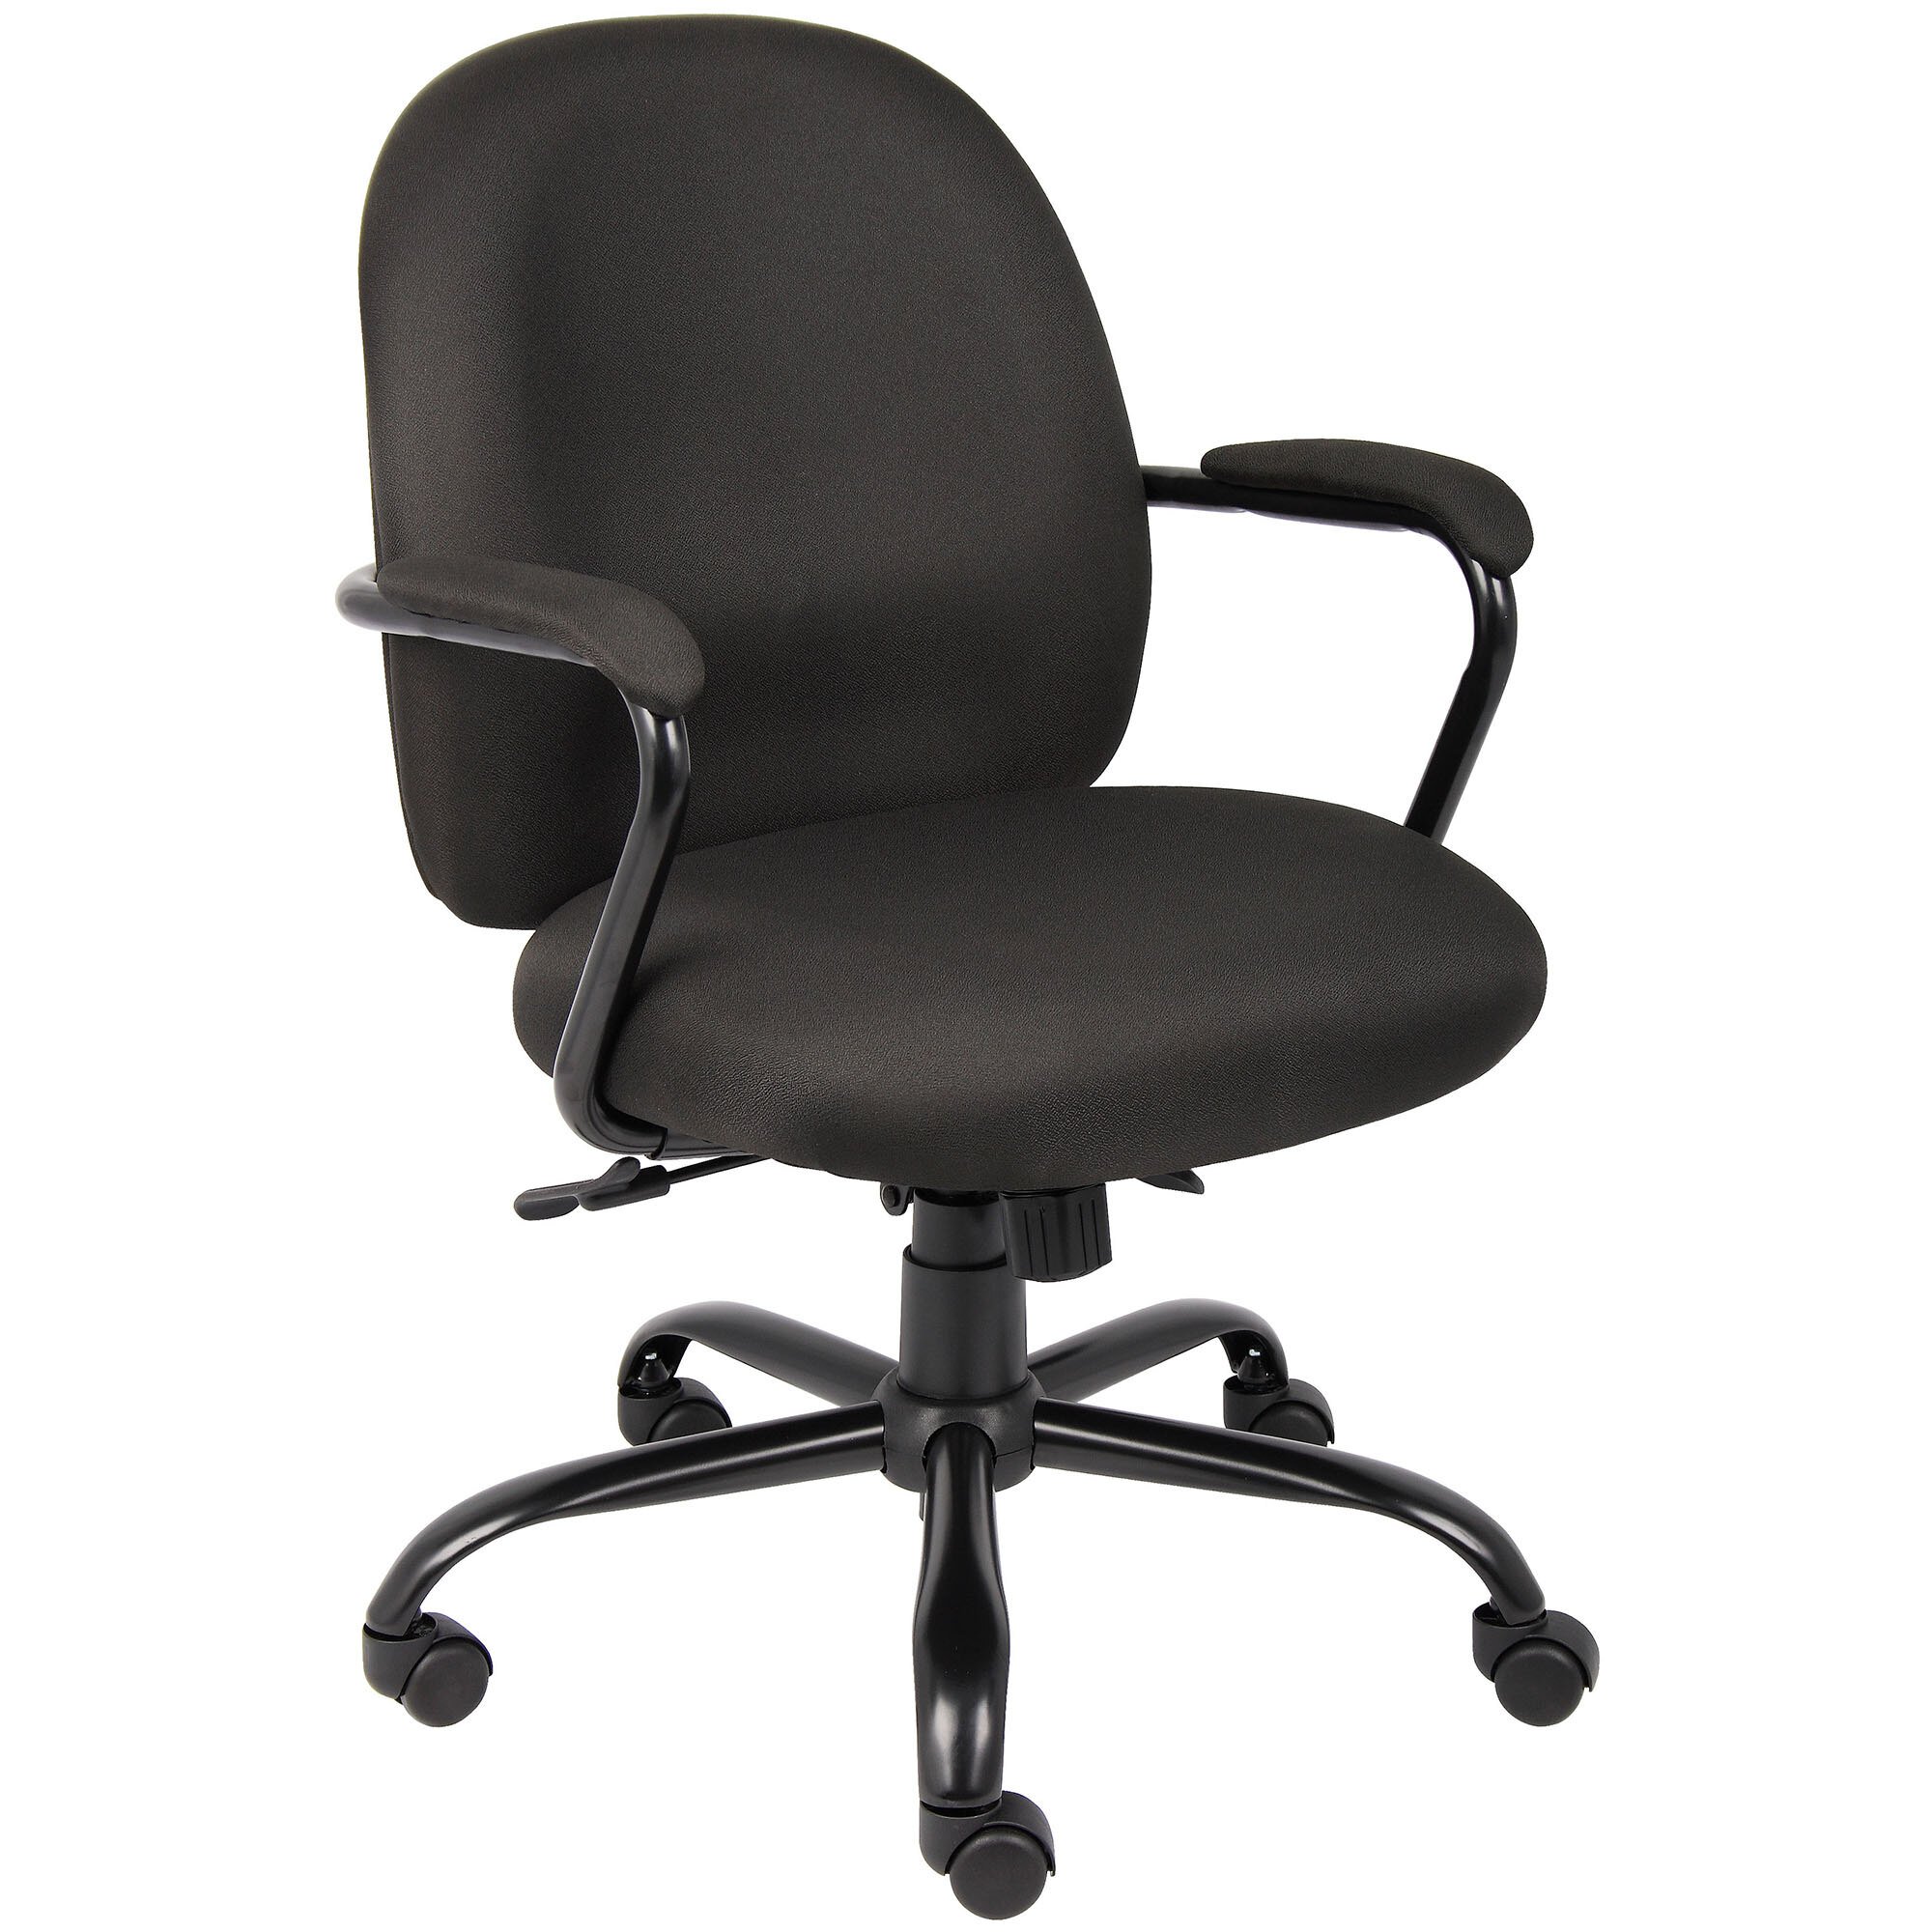 Heavy Duty Office Task Chairs - About Chair